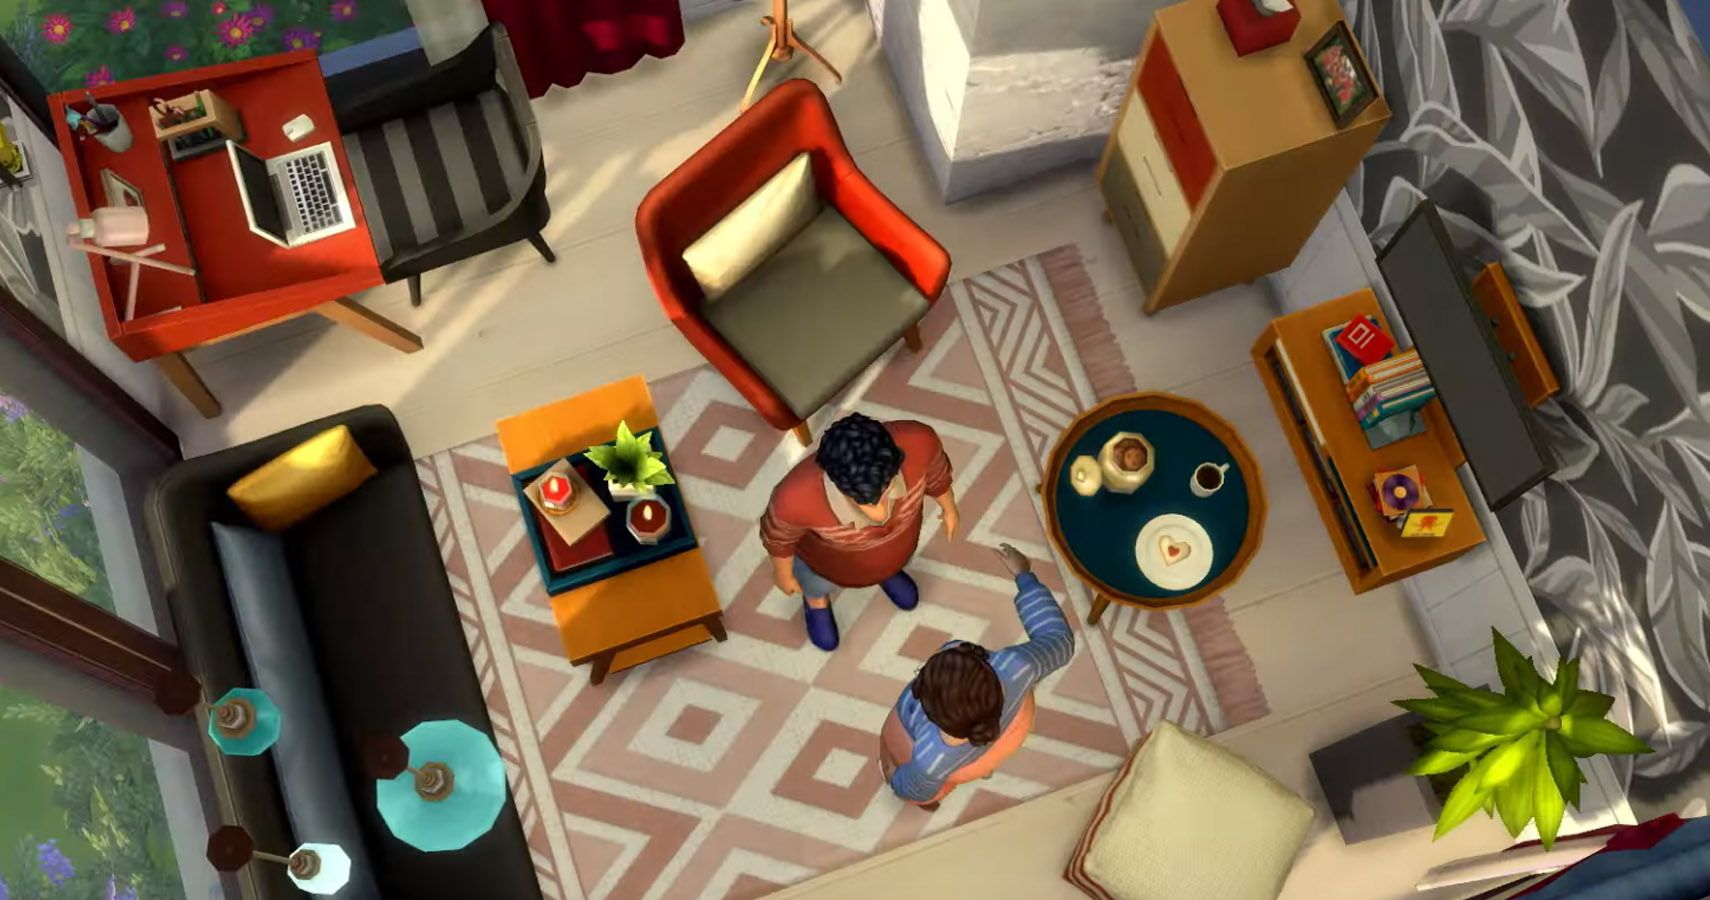 The Sims 4 Tiny Living Stuff: CAS Overview